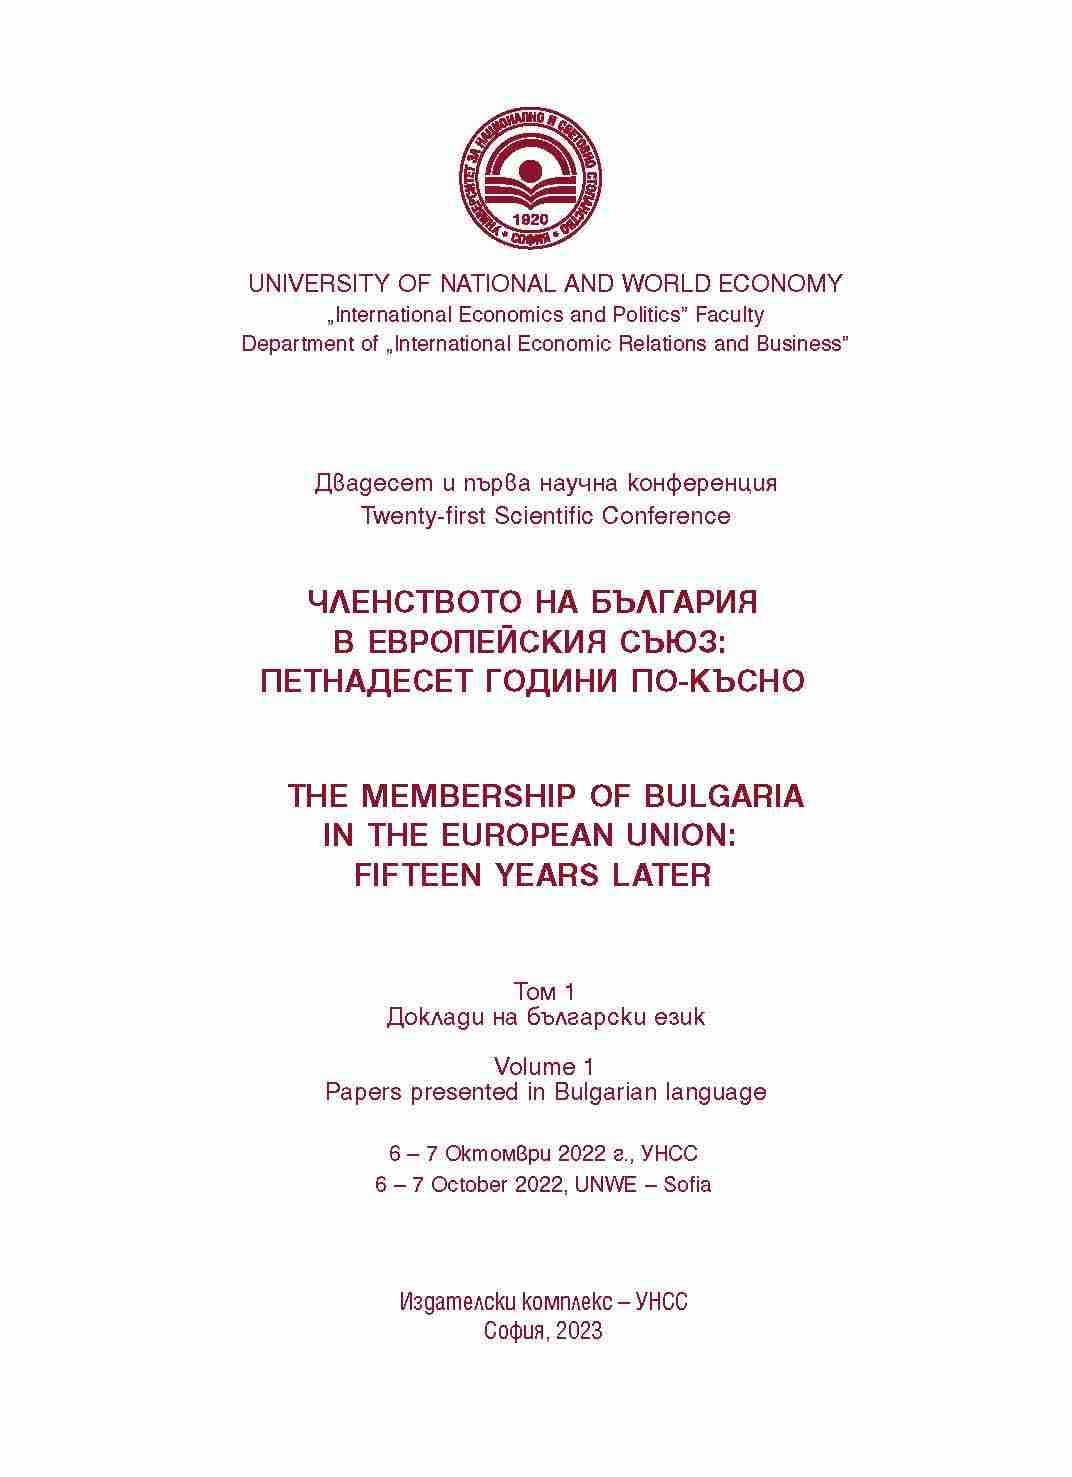 The Membership of Bulgaria in the European Union: Fifteen Years Later: Twenty-First Scientific Conference